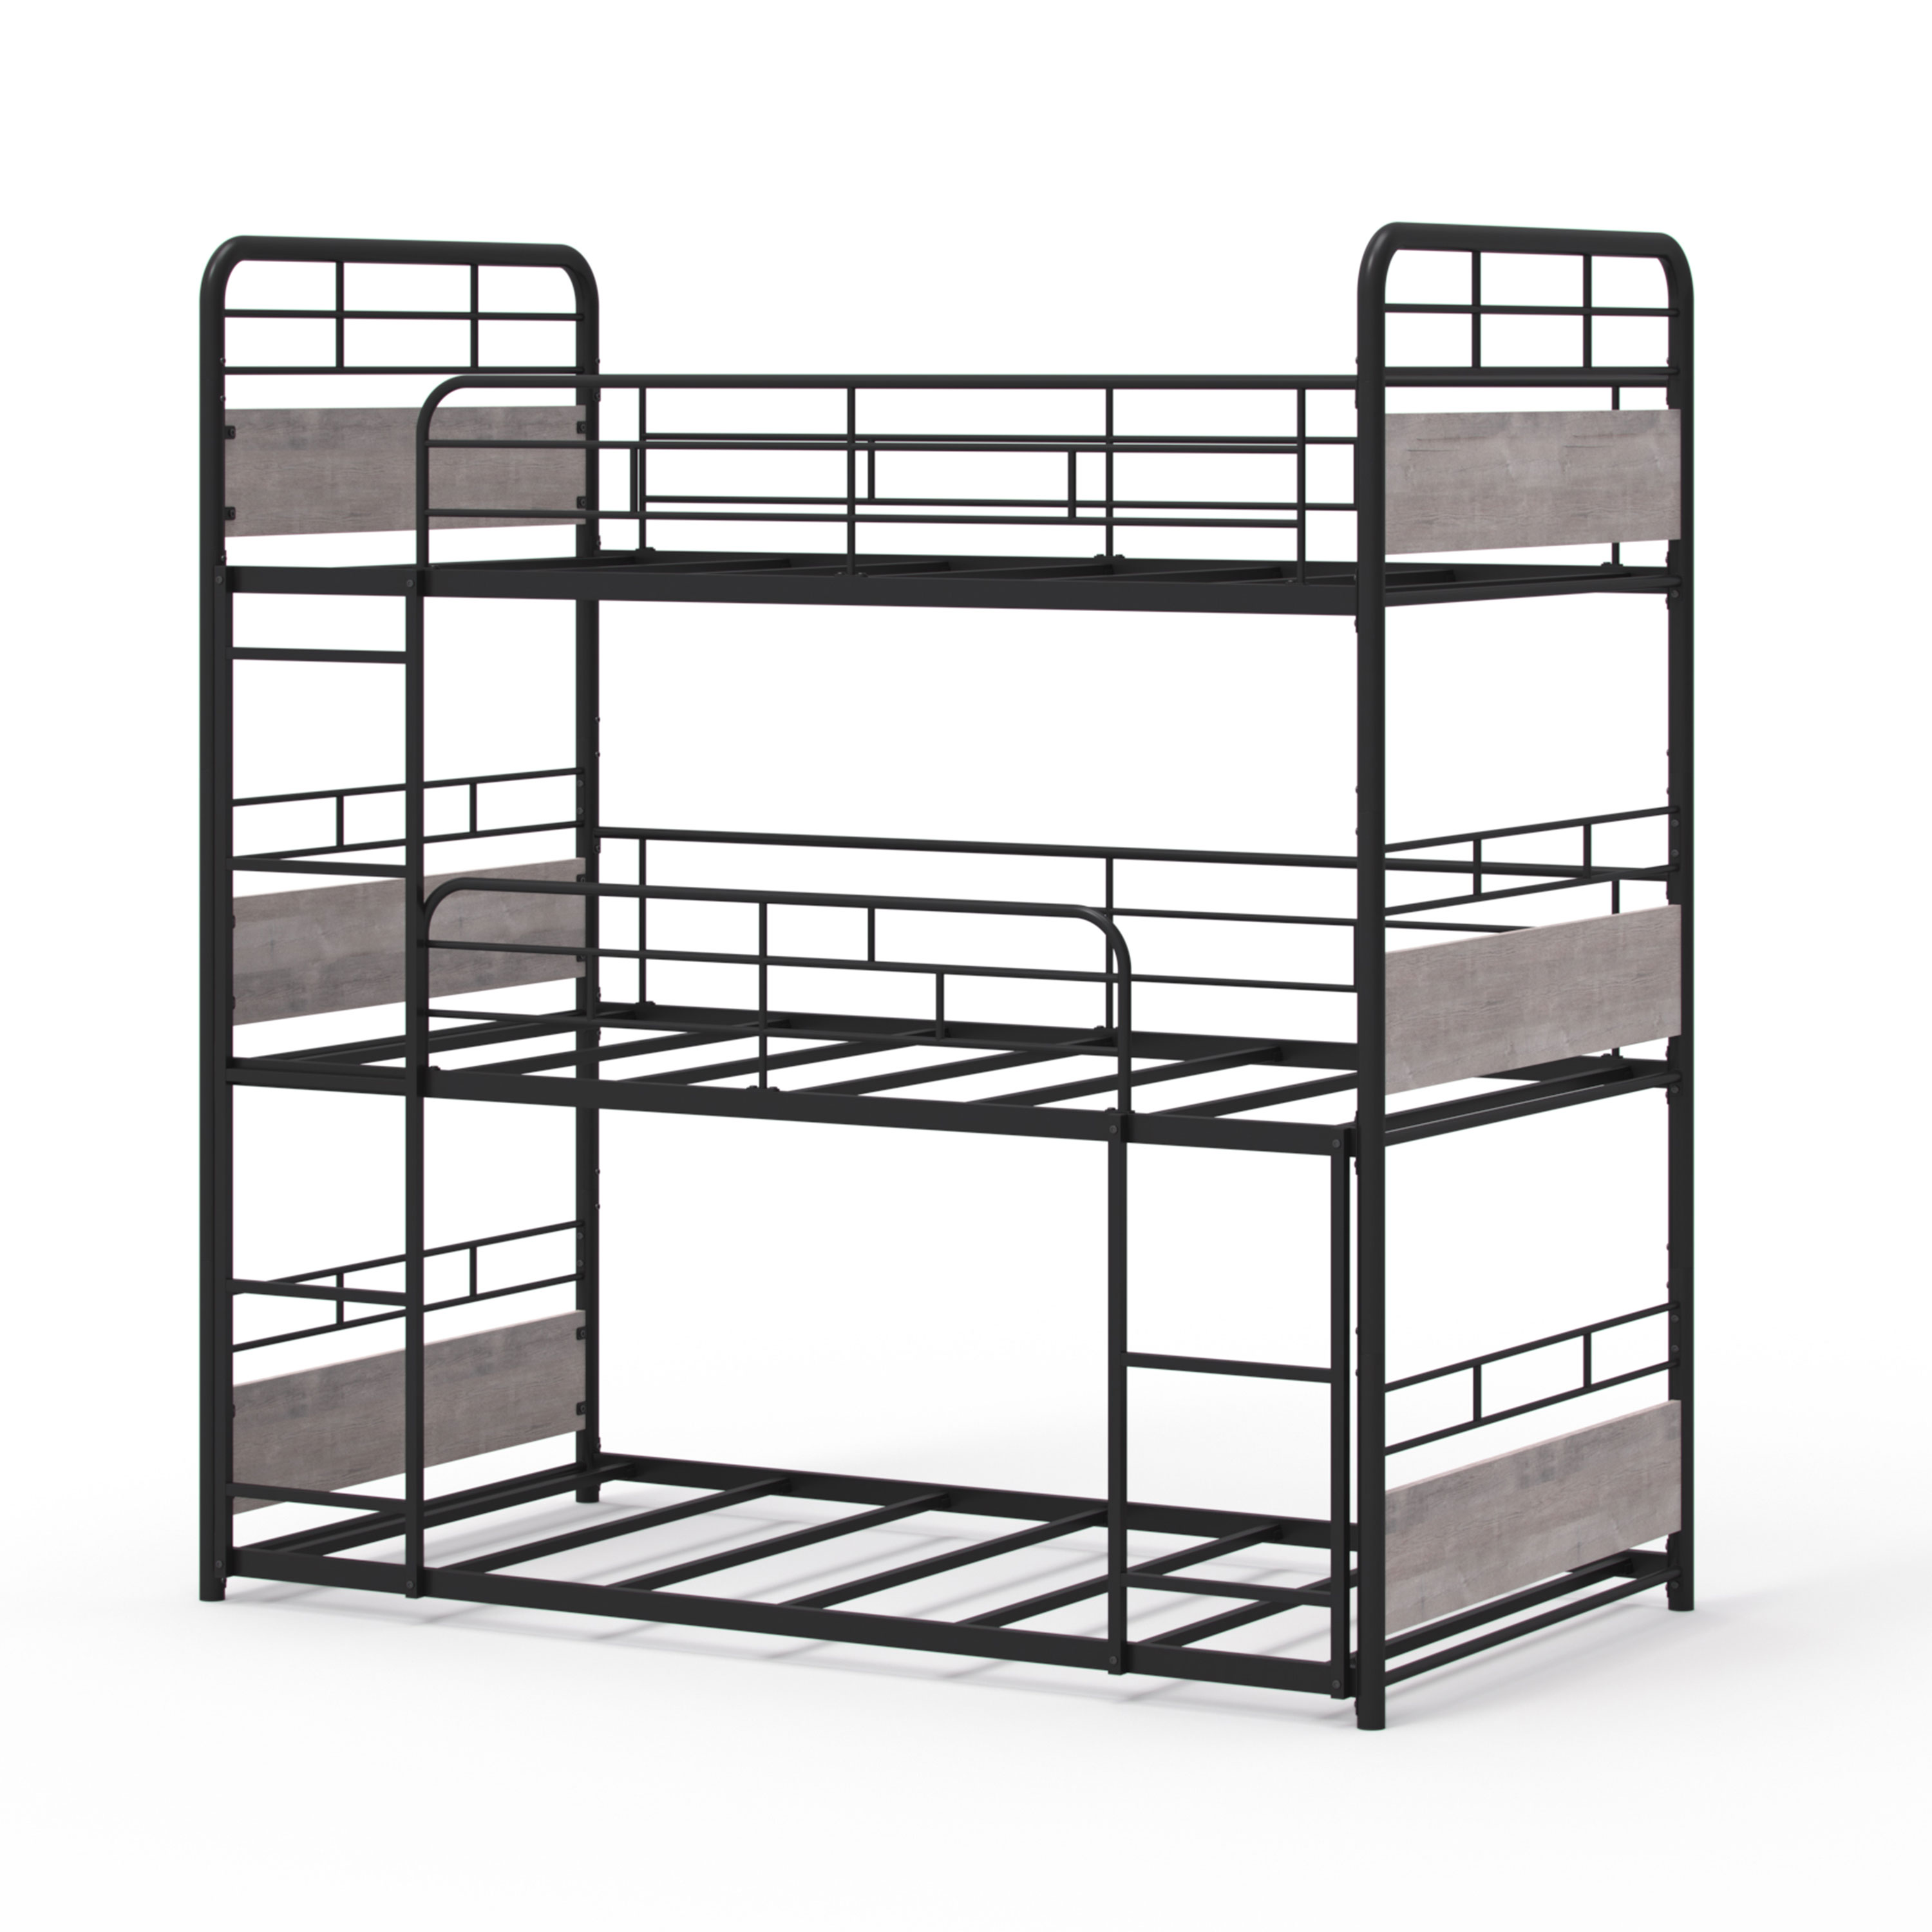 Better Homes & Gardens Anniston Convertible Black Metal Triple Twin Bunk Bed, Gray Wood Accents - image 9 of 26